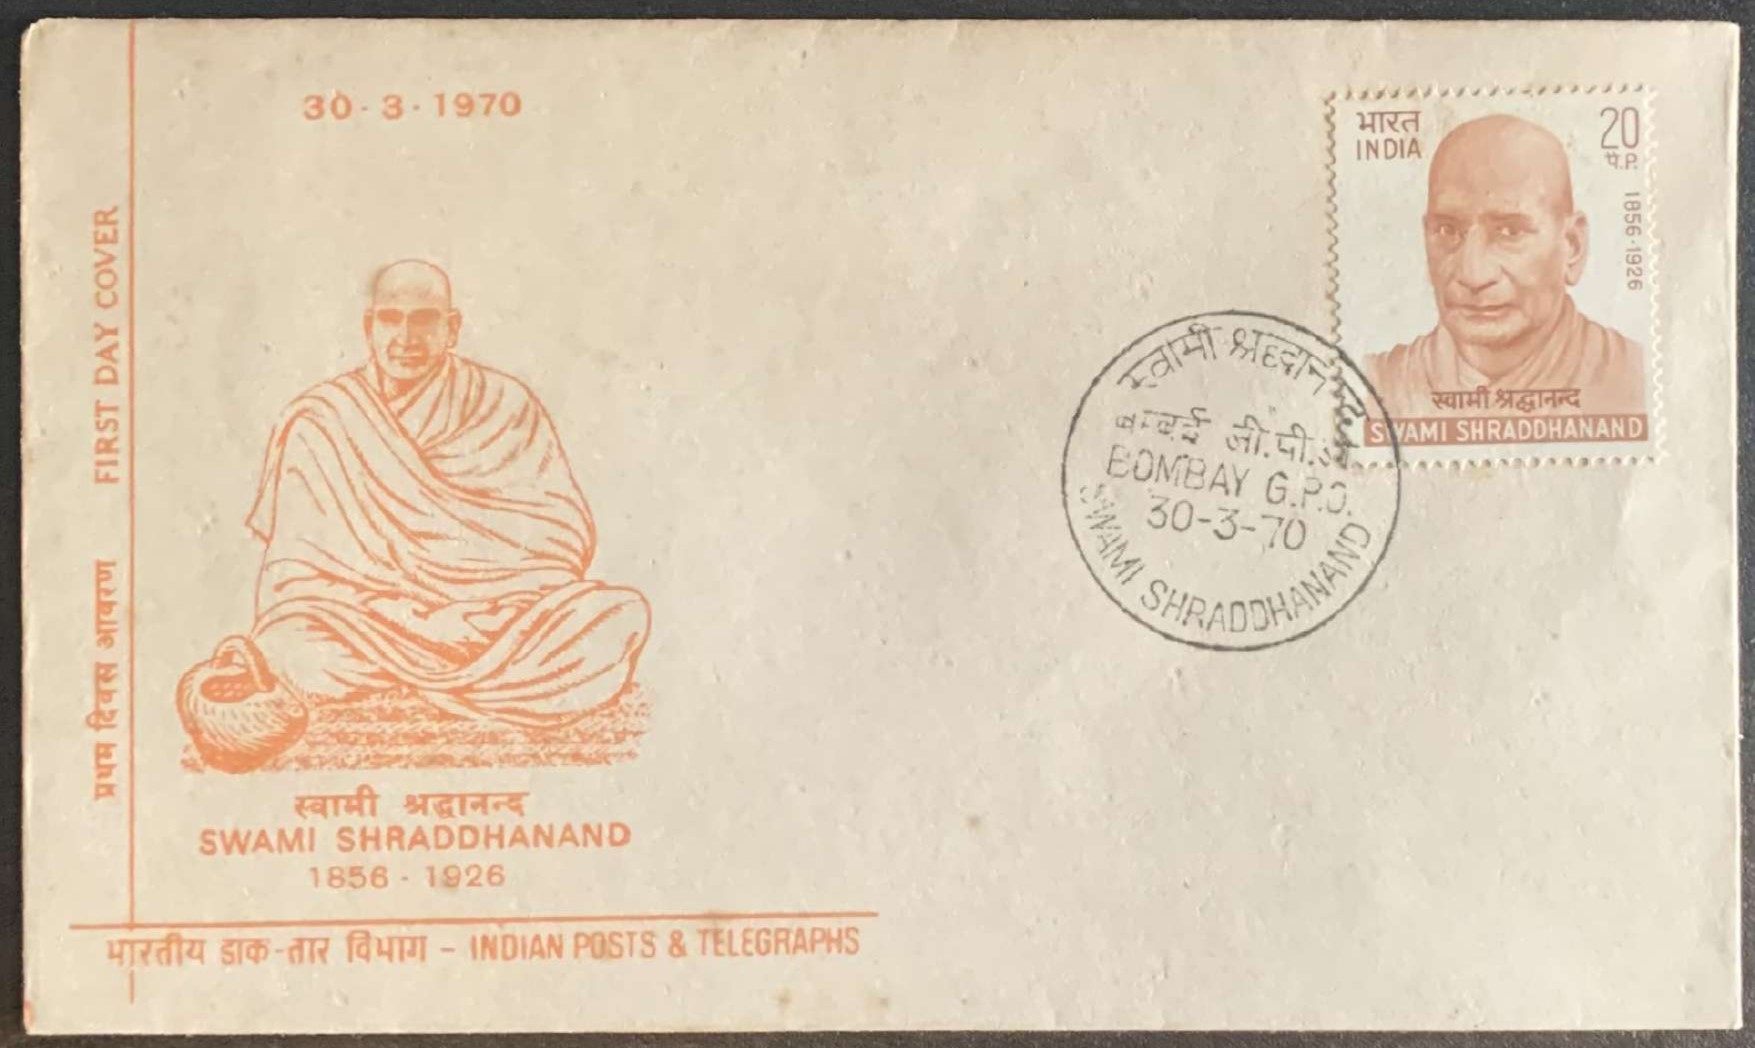 India 1970 Swami Shraddhanand First Day Cover